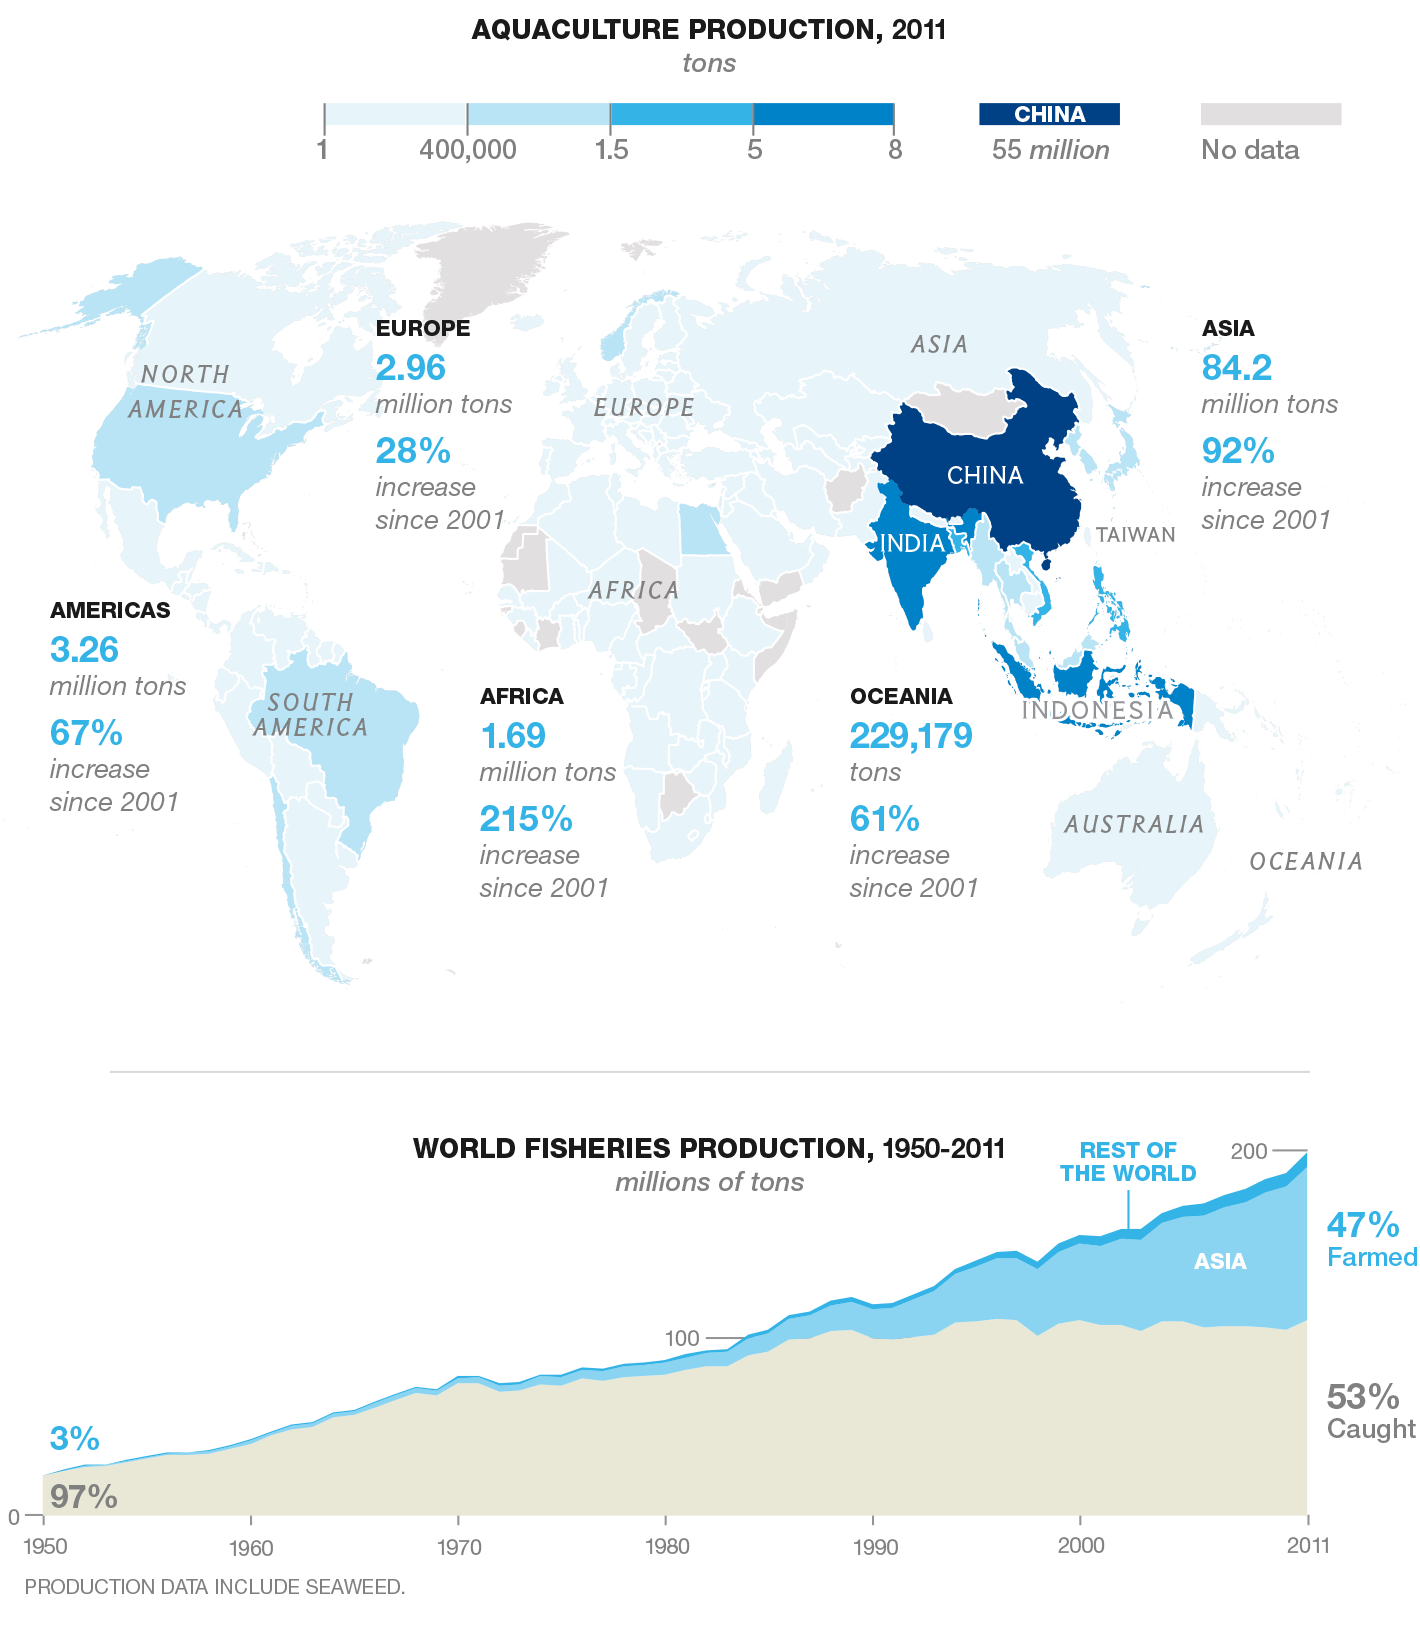 Map of the world's aquaculture production in 2011